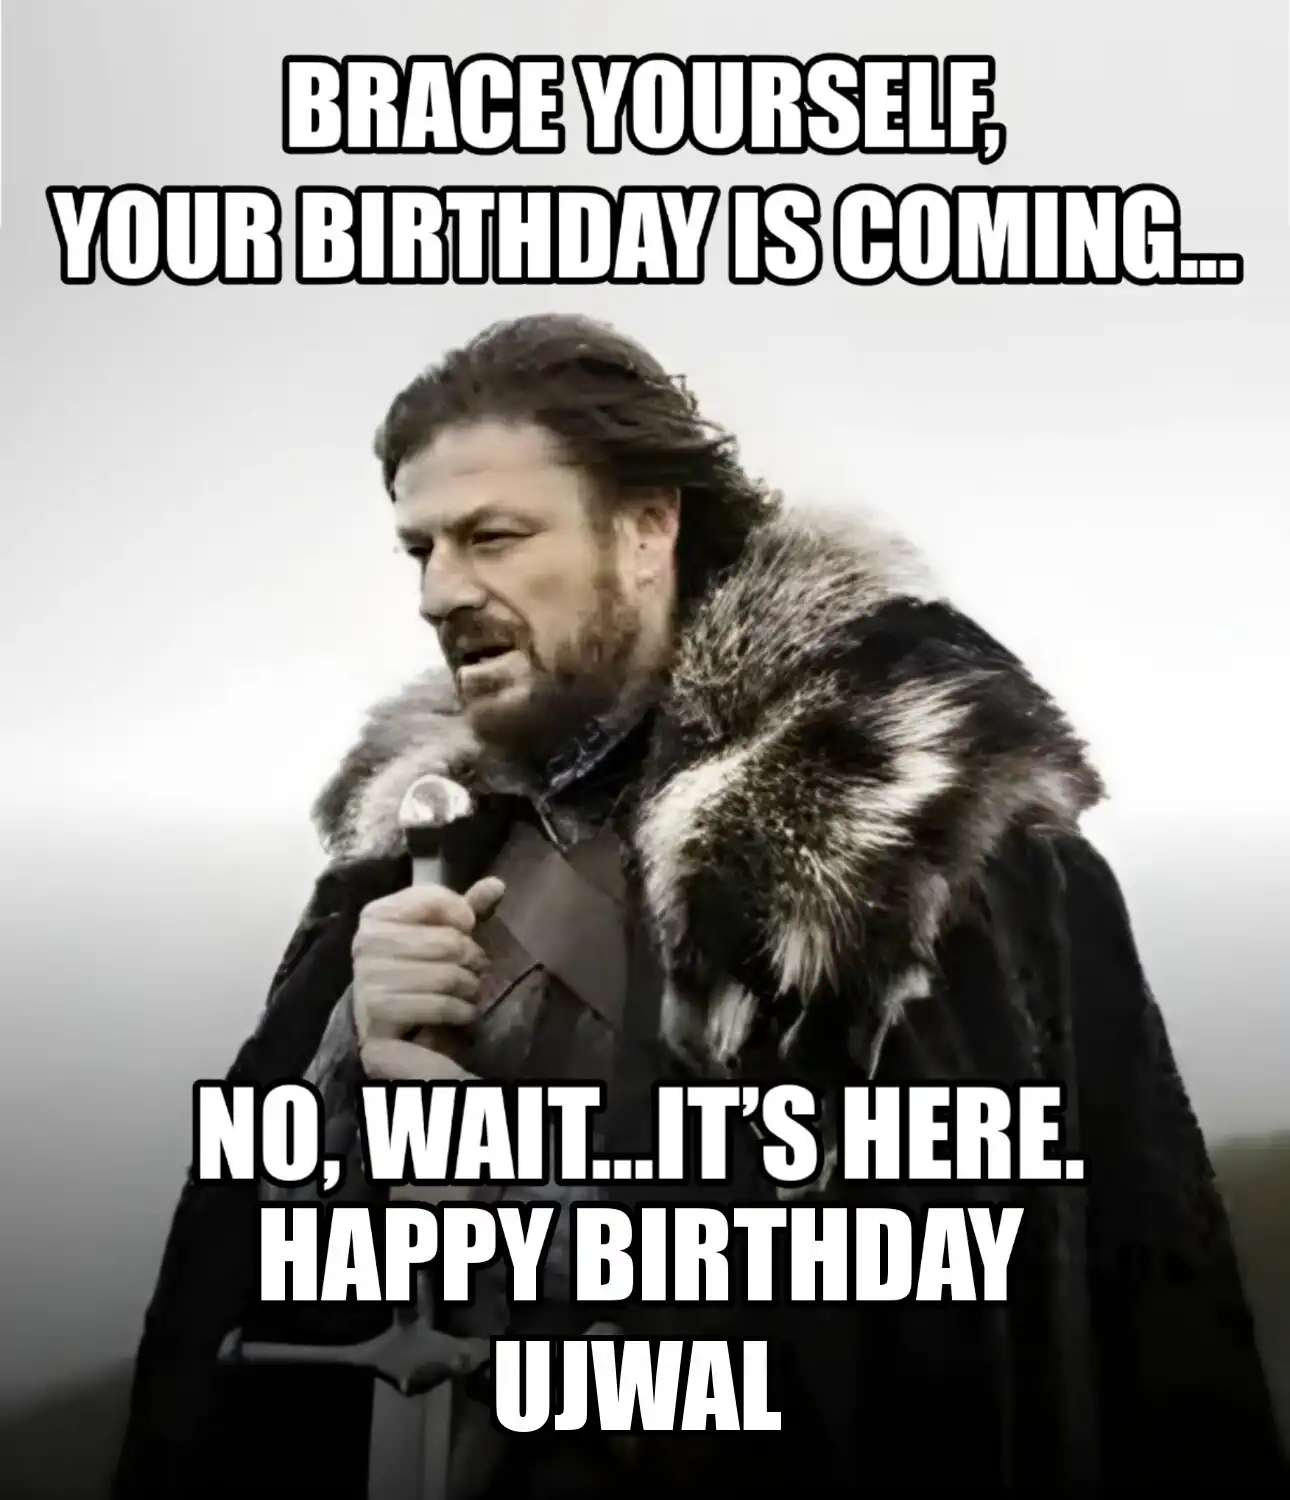 Happy Birthday Ujwal Brace Yourself Your Birthday Is Coming Meme